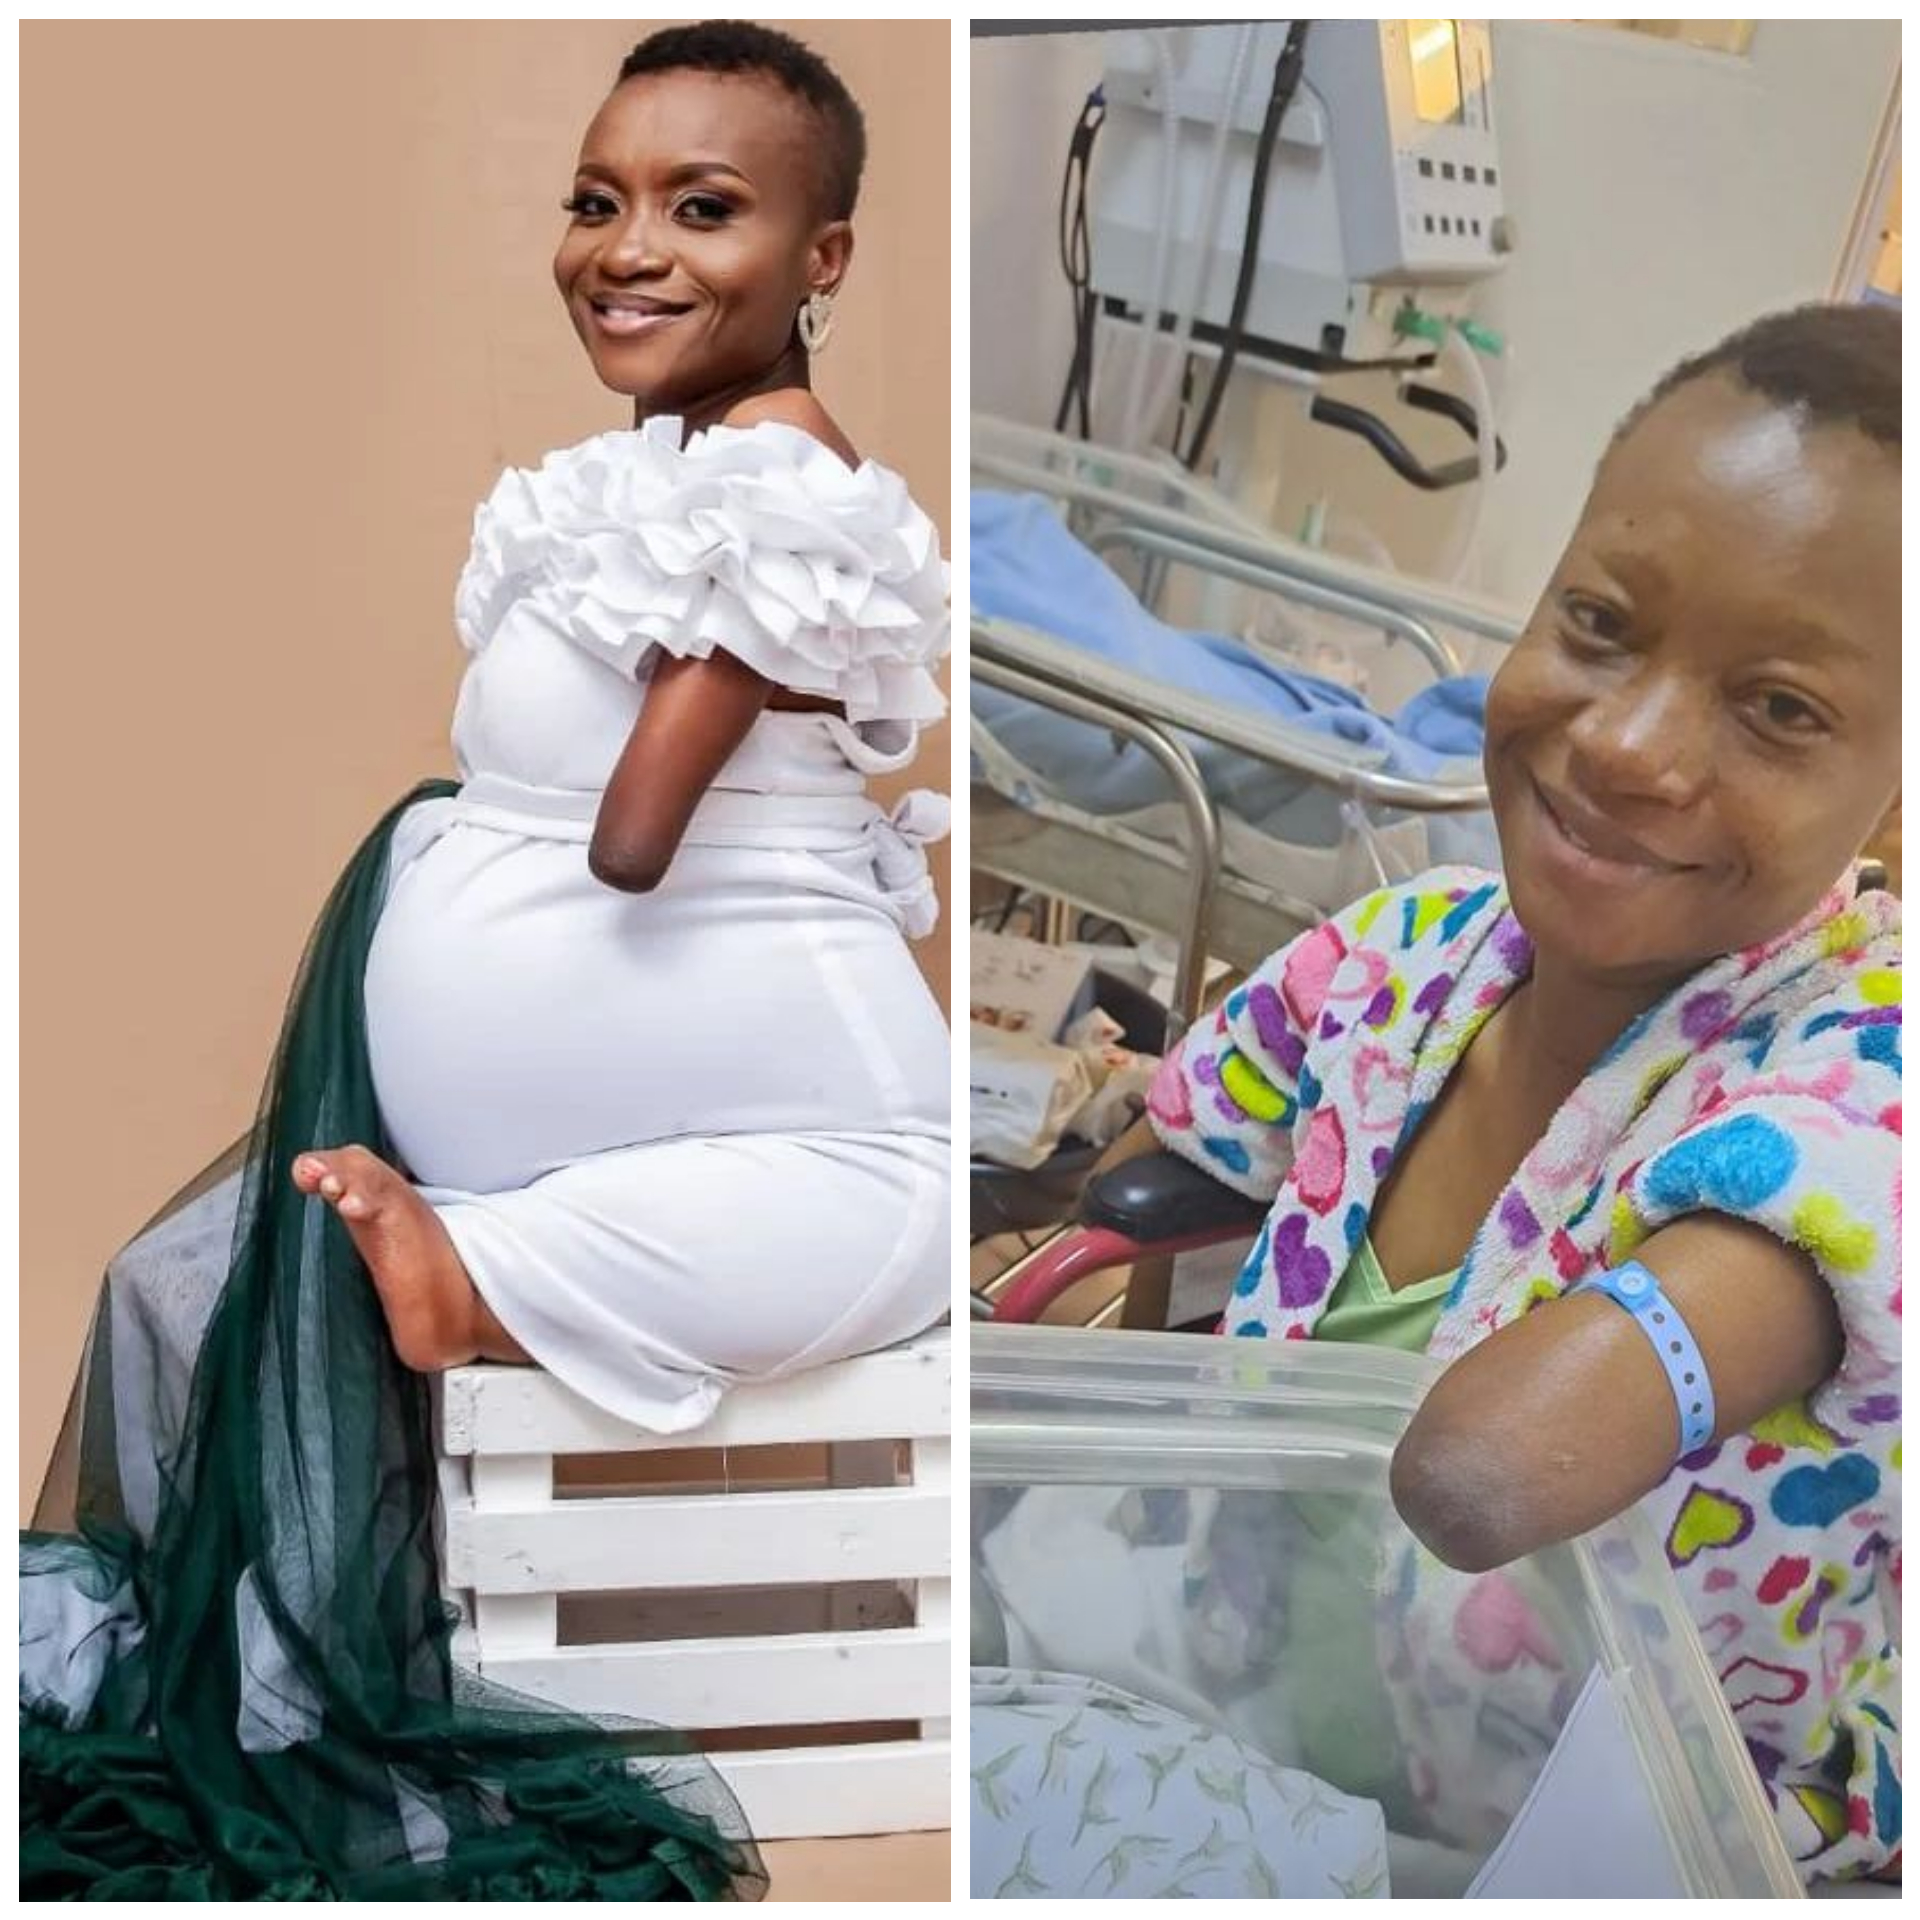 ZIMBABWEAN WOMAN BORN WITHOUT LIMBS GIVES BIRTH TO HER FIRST CHILD (video)